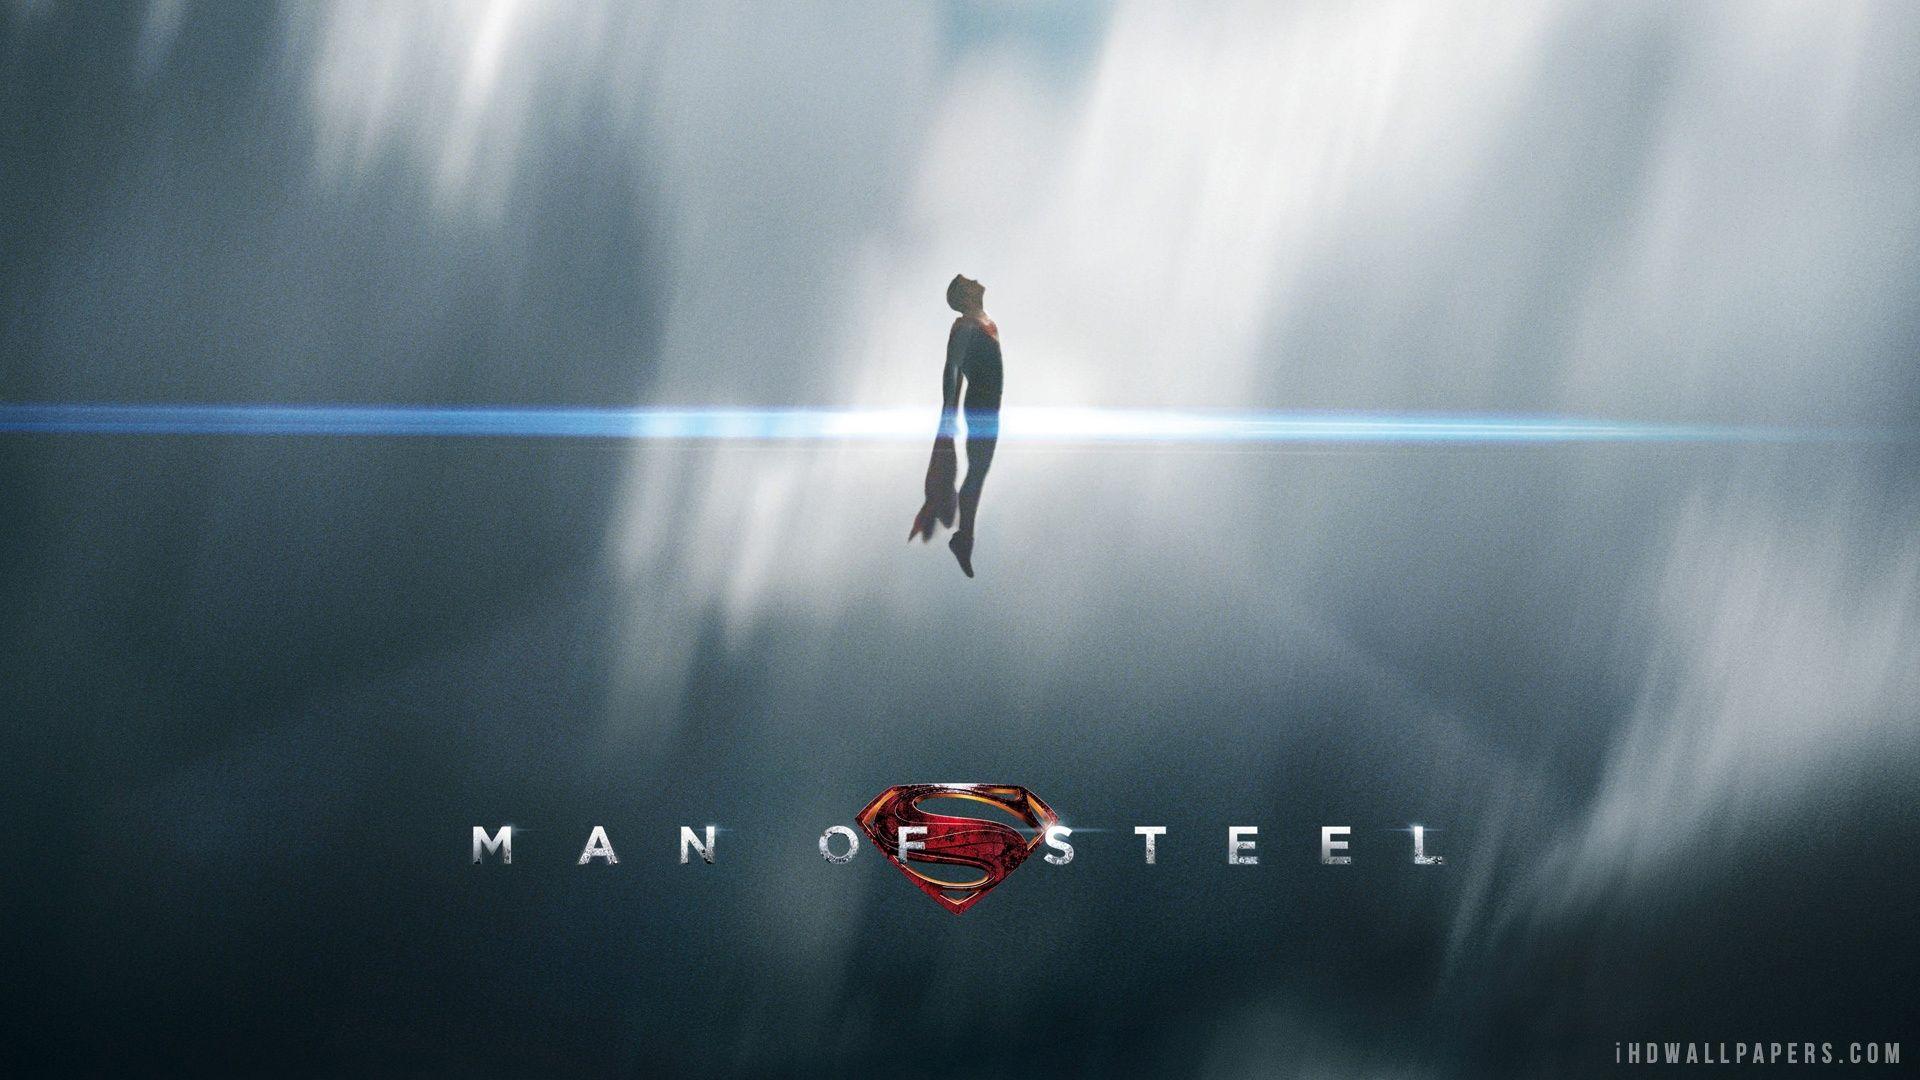 Man Of Steel 2 HD Wallpaper Photo Free Download. Movies TV Shows